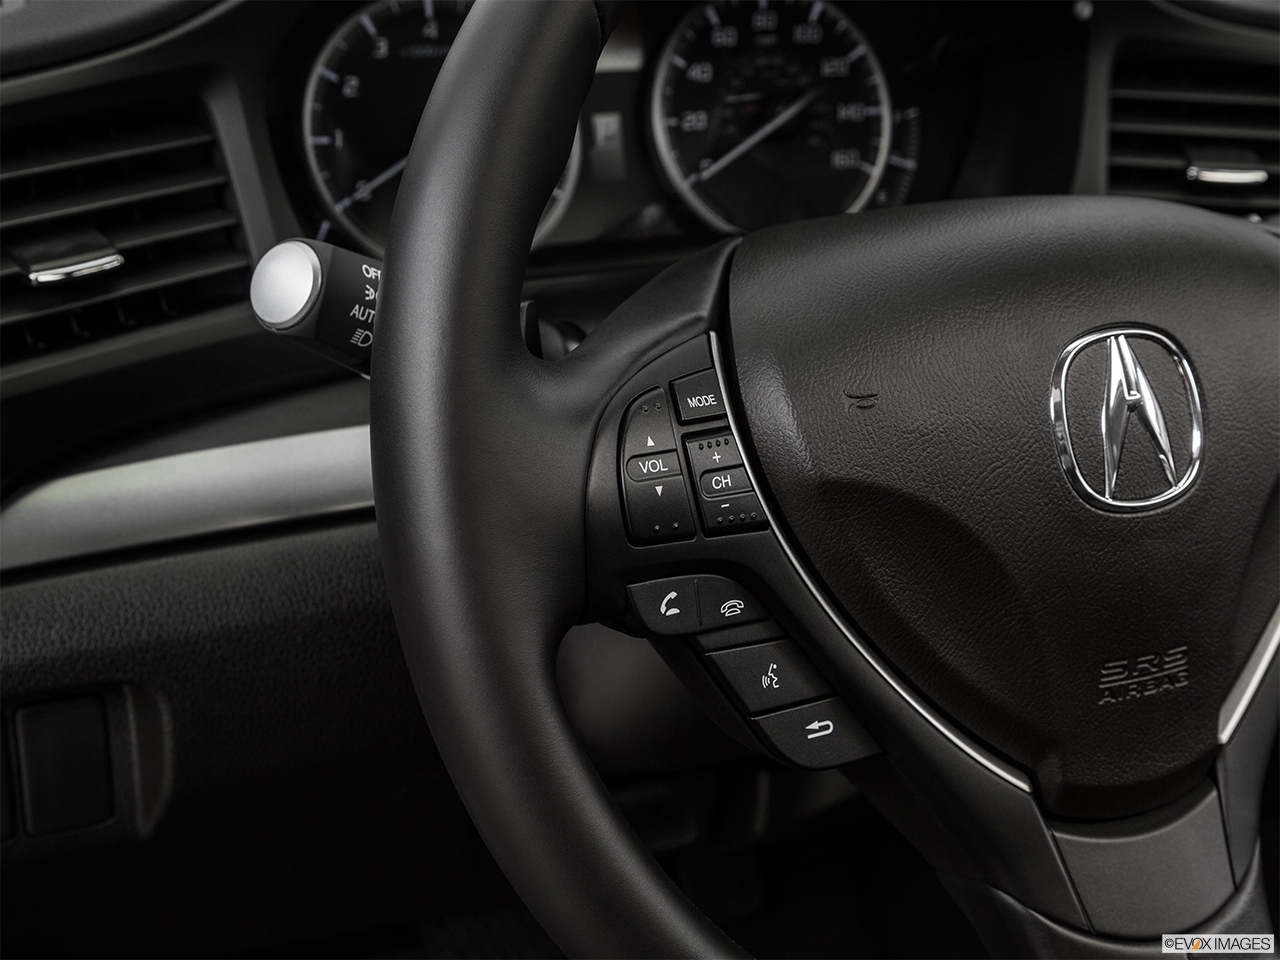 2015 Acura ILX 5-Speed Automatic Steering Wheel Controls (Left Side) 